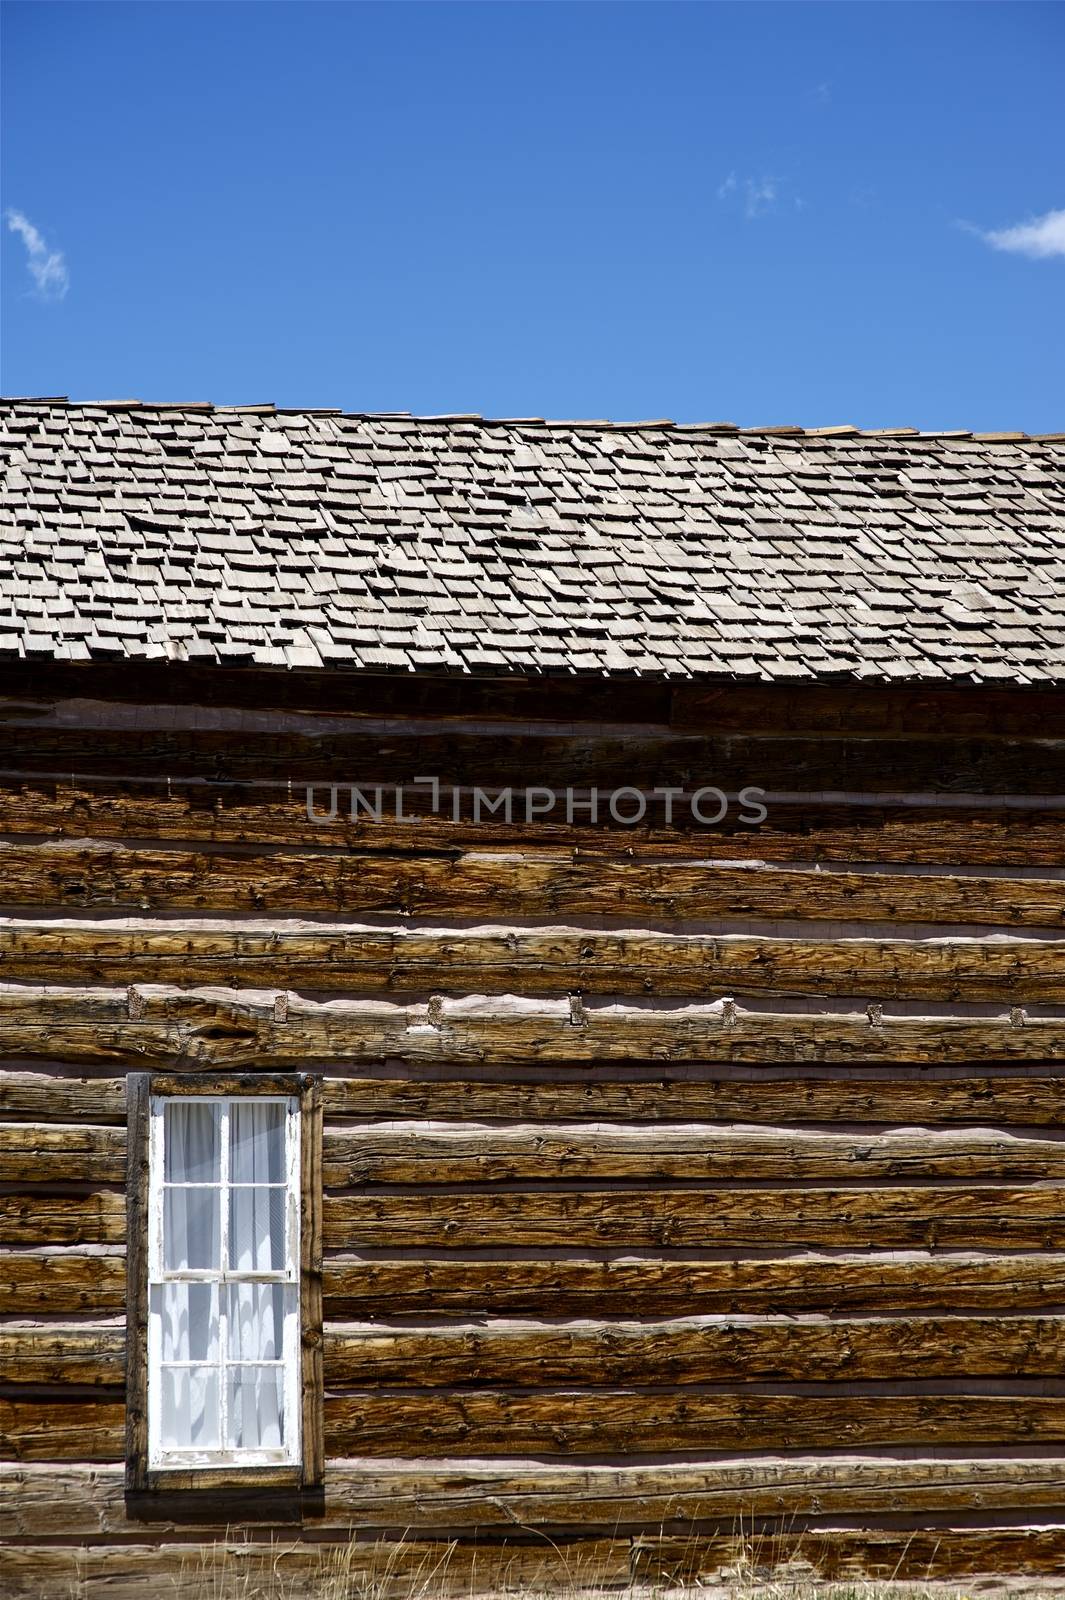 Vintage Building - Very Old Colorado Log House with Small Window. Vertical Photography. Colorado U.S.A.